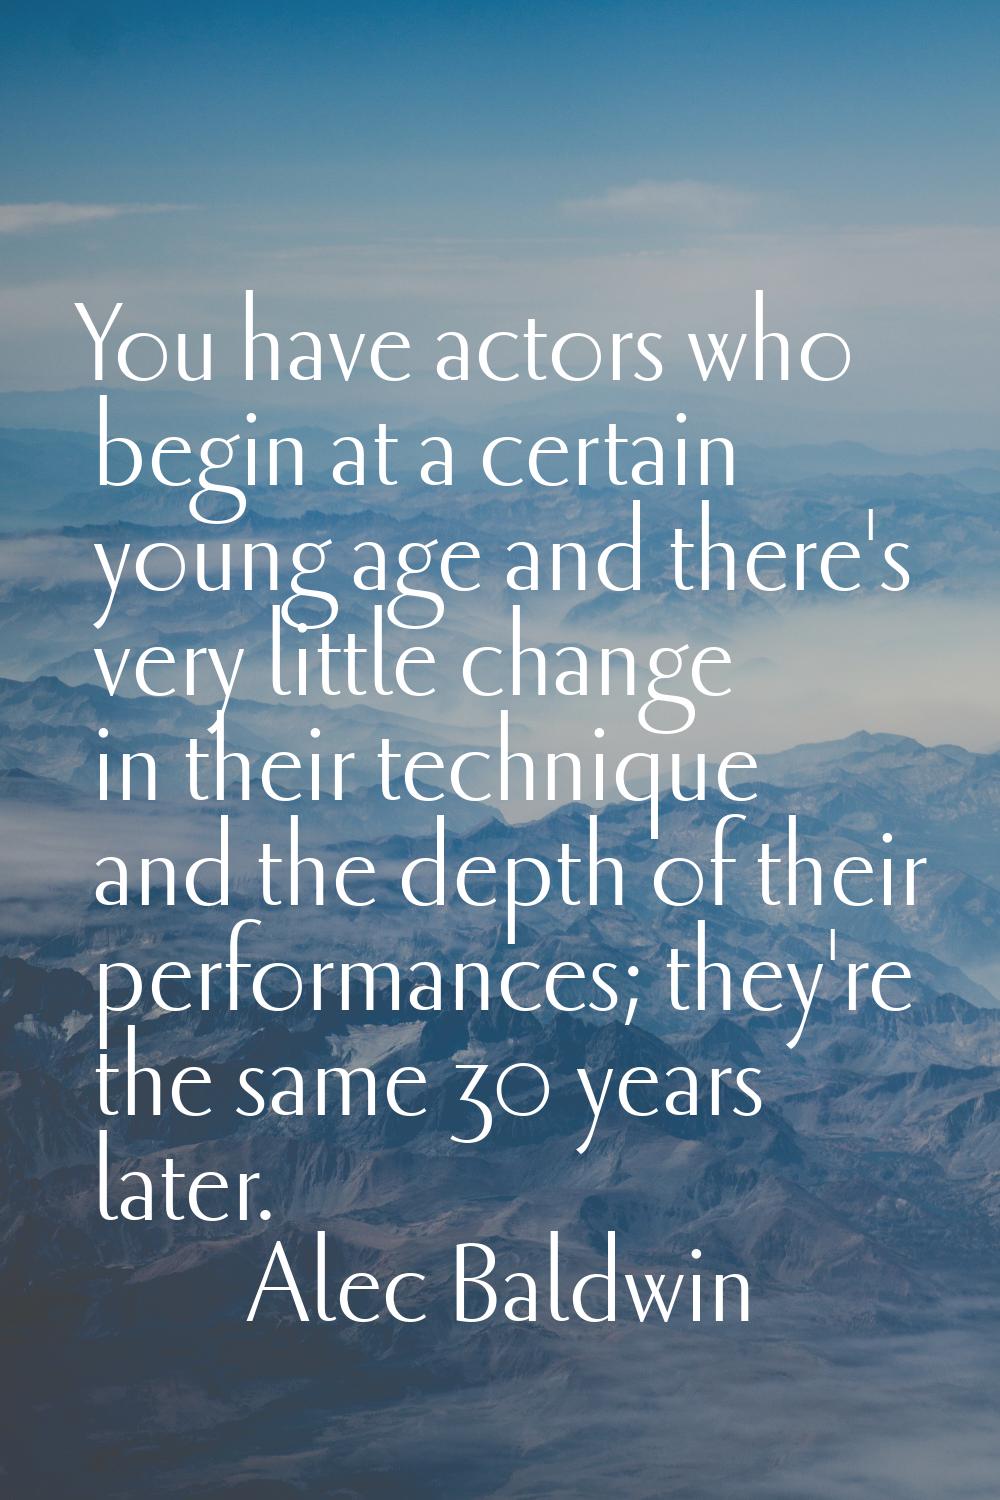 You have actors who begin at a certain young age and there's very little change in their technique 